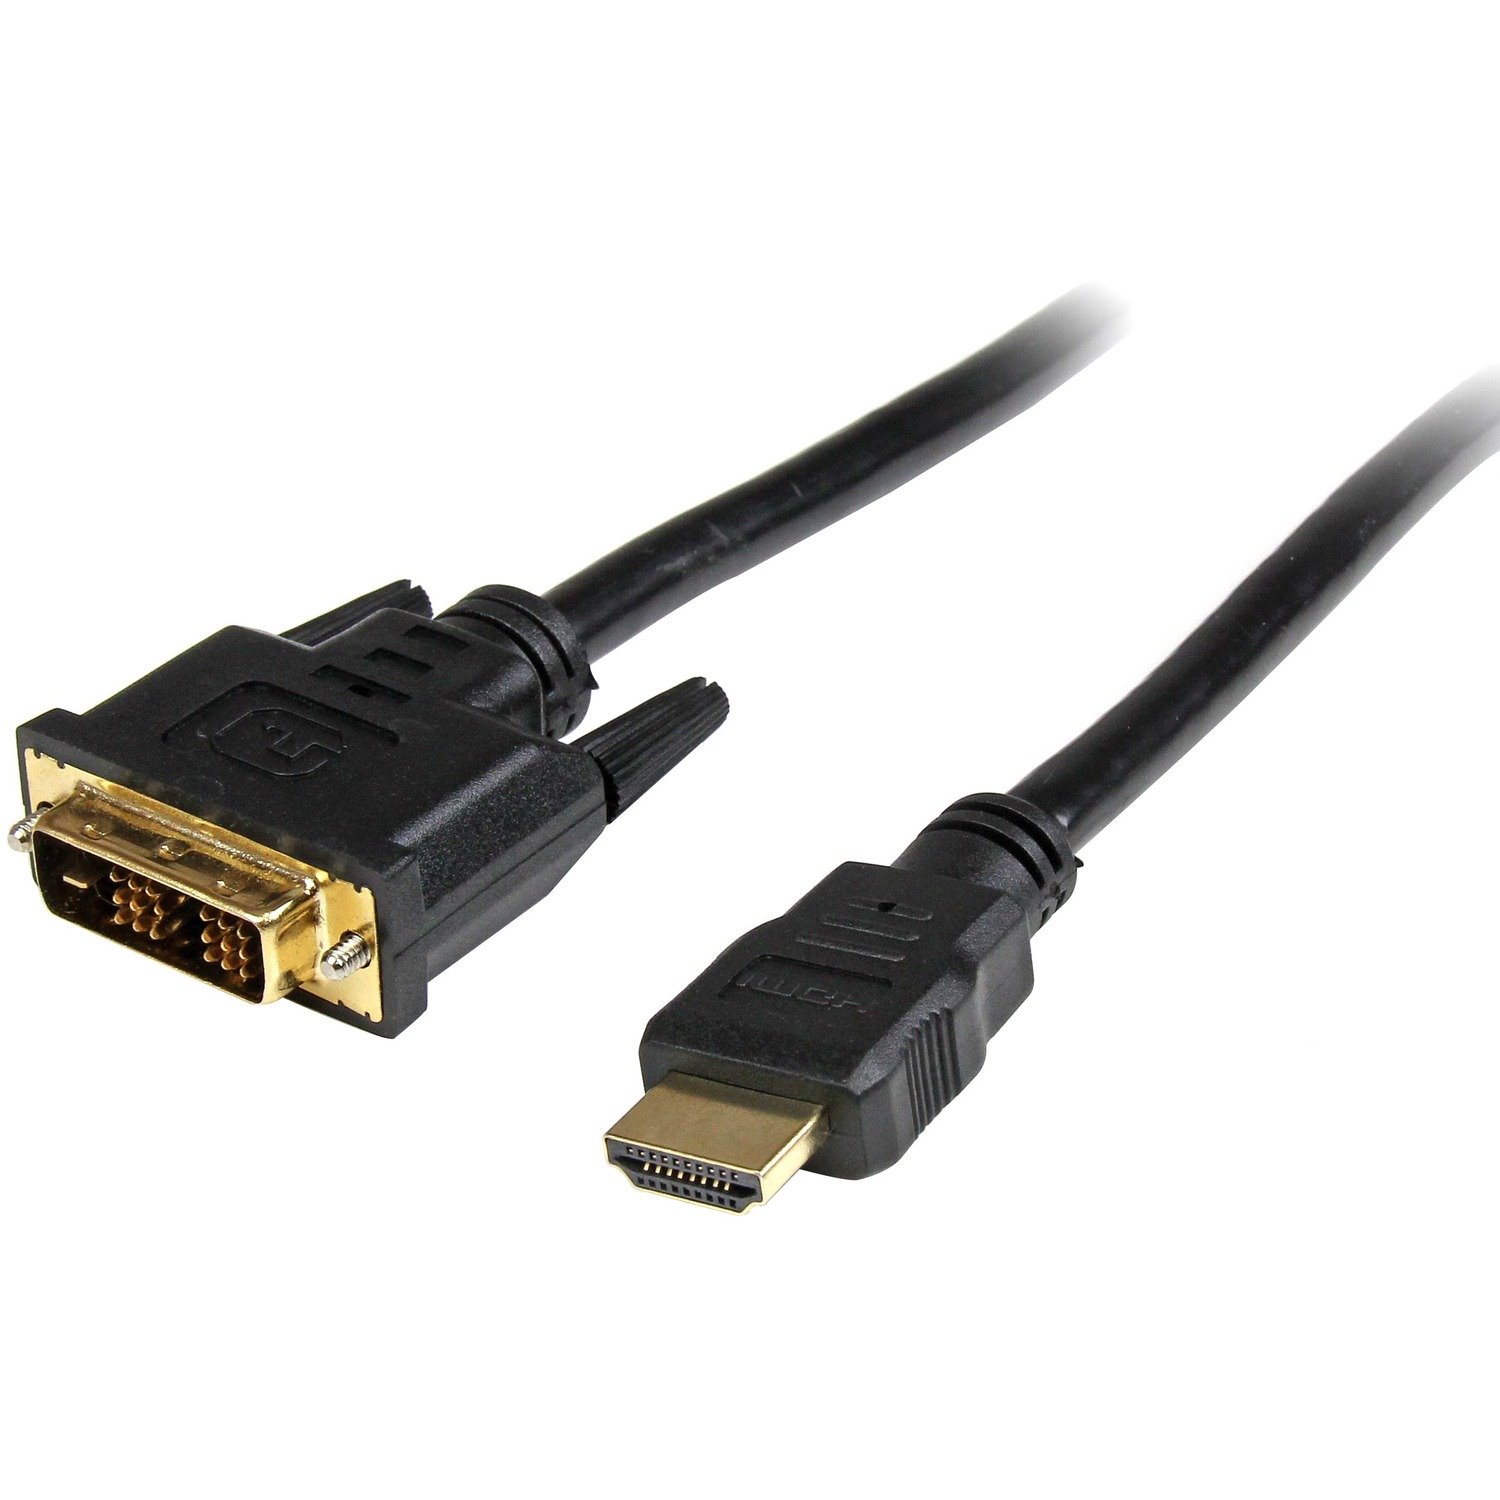 StarTech.com 3.05 m DVI/HDMI Video Cable for Video Device, LCD TV, Projector, Plasma, HDTV, DVD Player, Set-top Box, Monitor